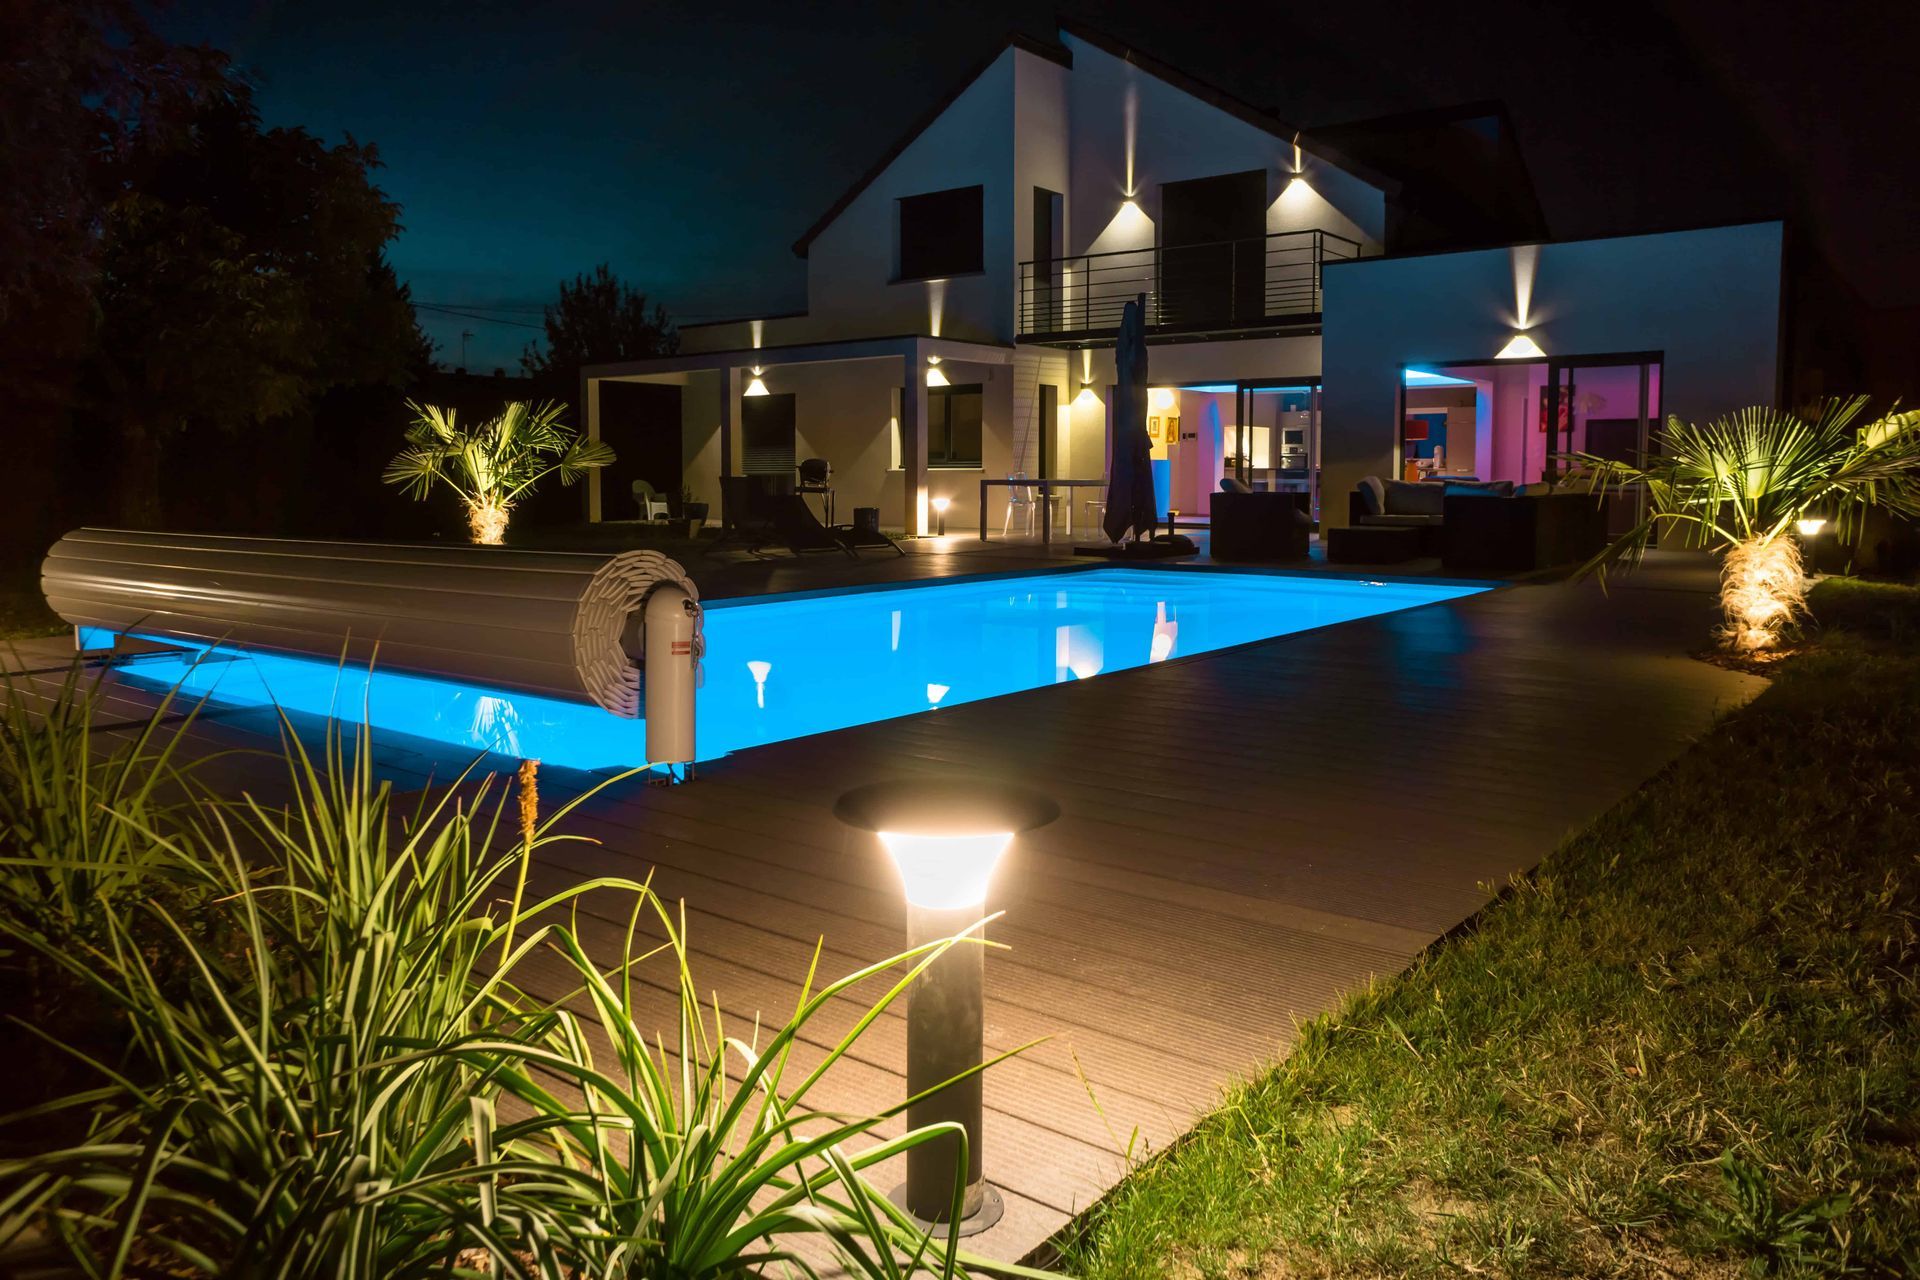 Pool lighting display in back of house by the pool